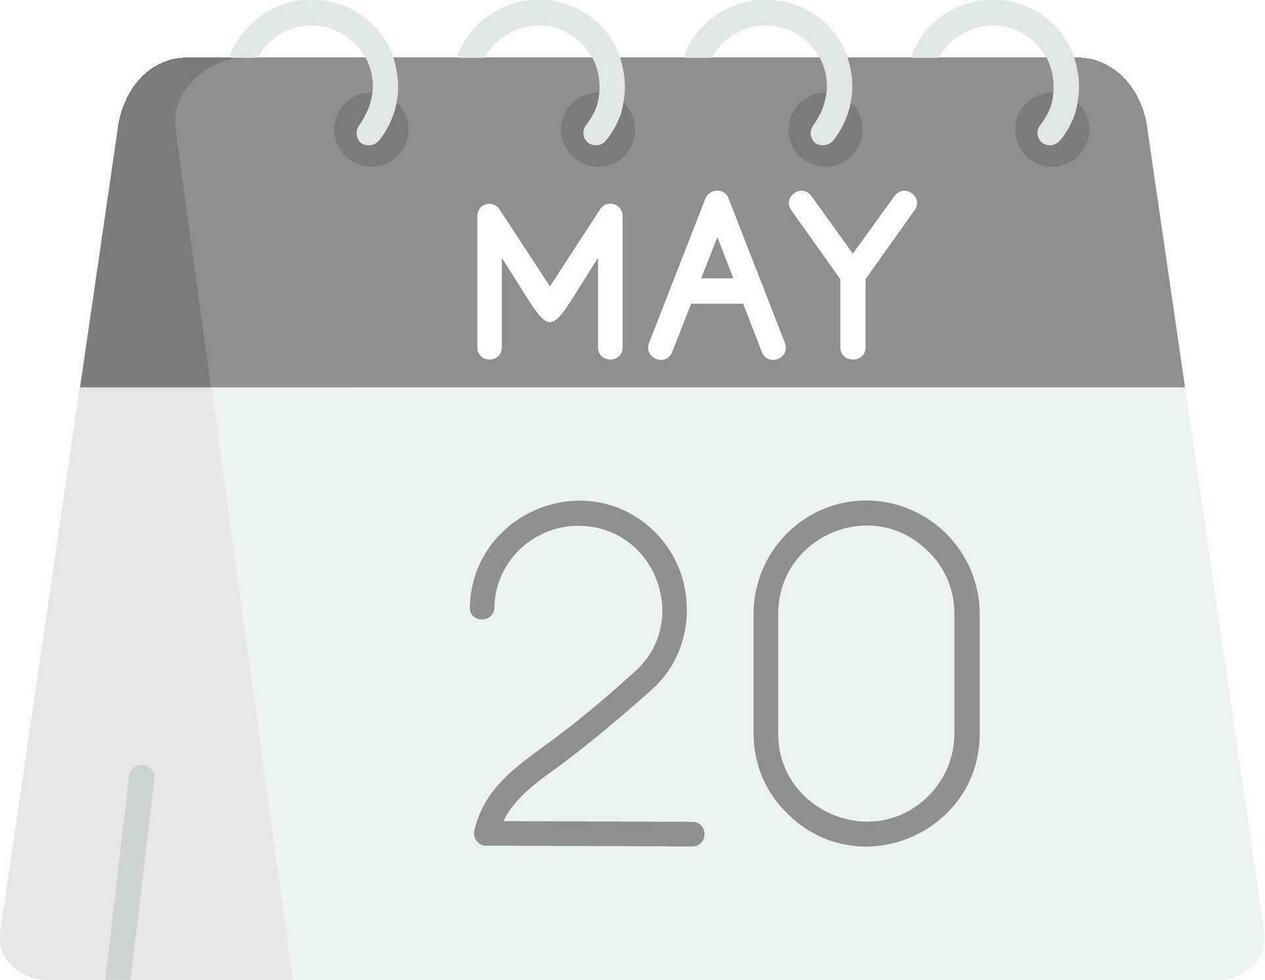 20th of May Grey scale Icon vector